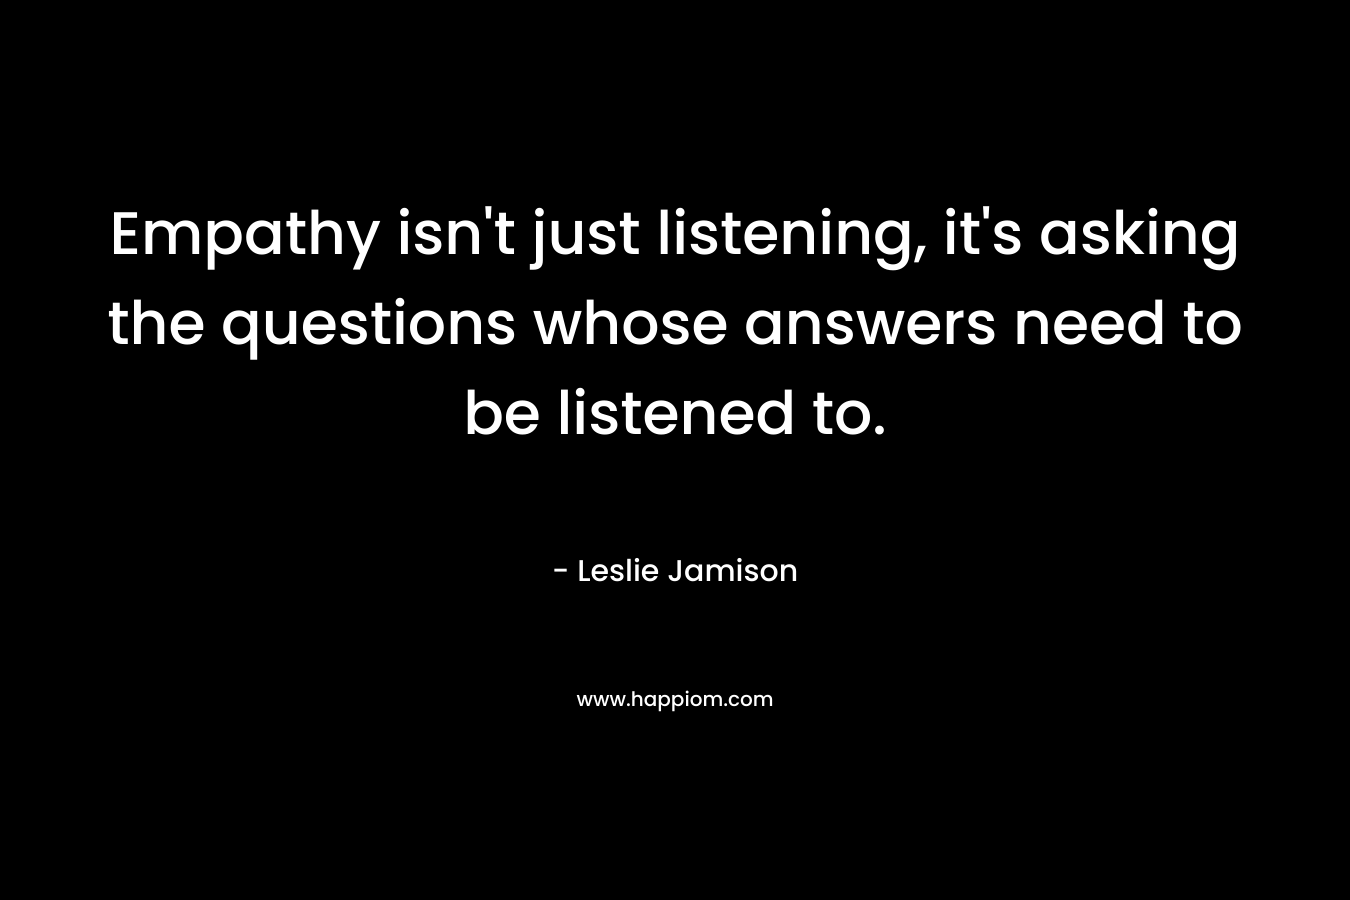 Empathy isn’t just listening, it’s asking the questions whose answers need to be listened to. – Leslie Jamison